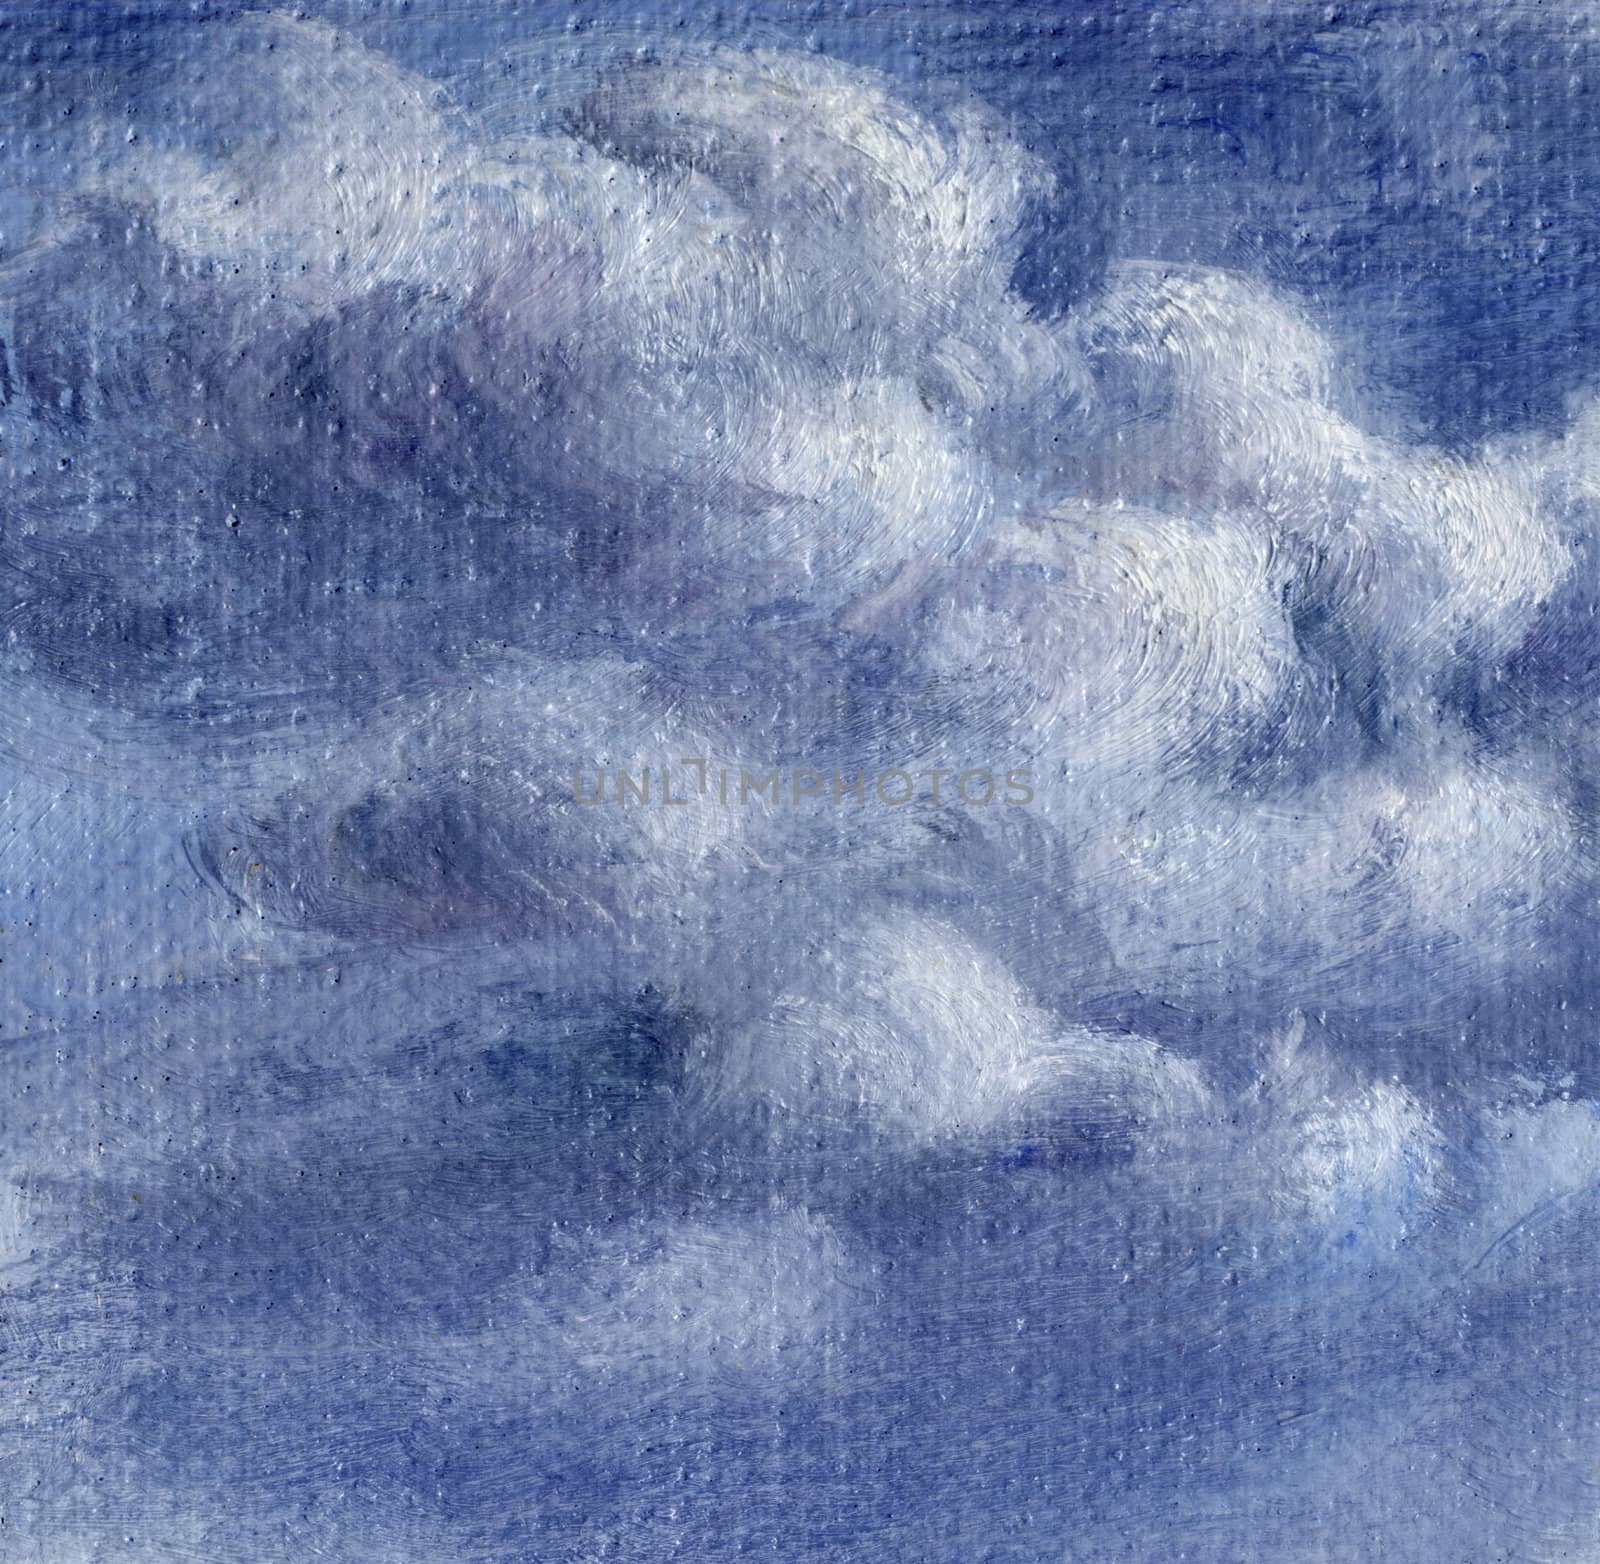 Blue sky with white clouds. Picture, oil paints, hand-draw on canvas